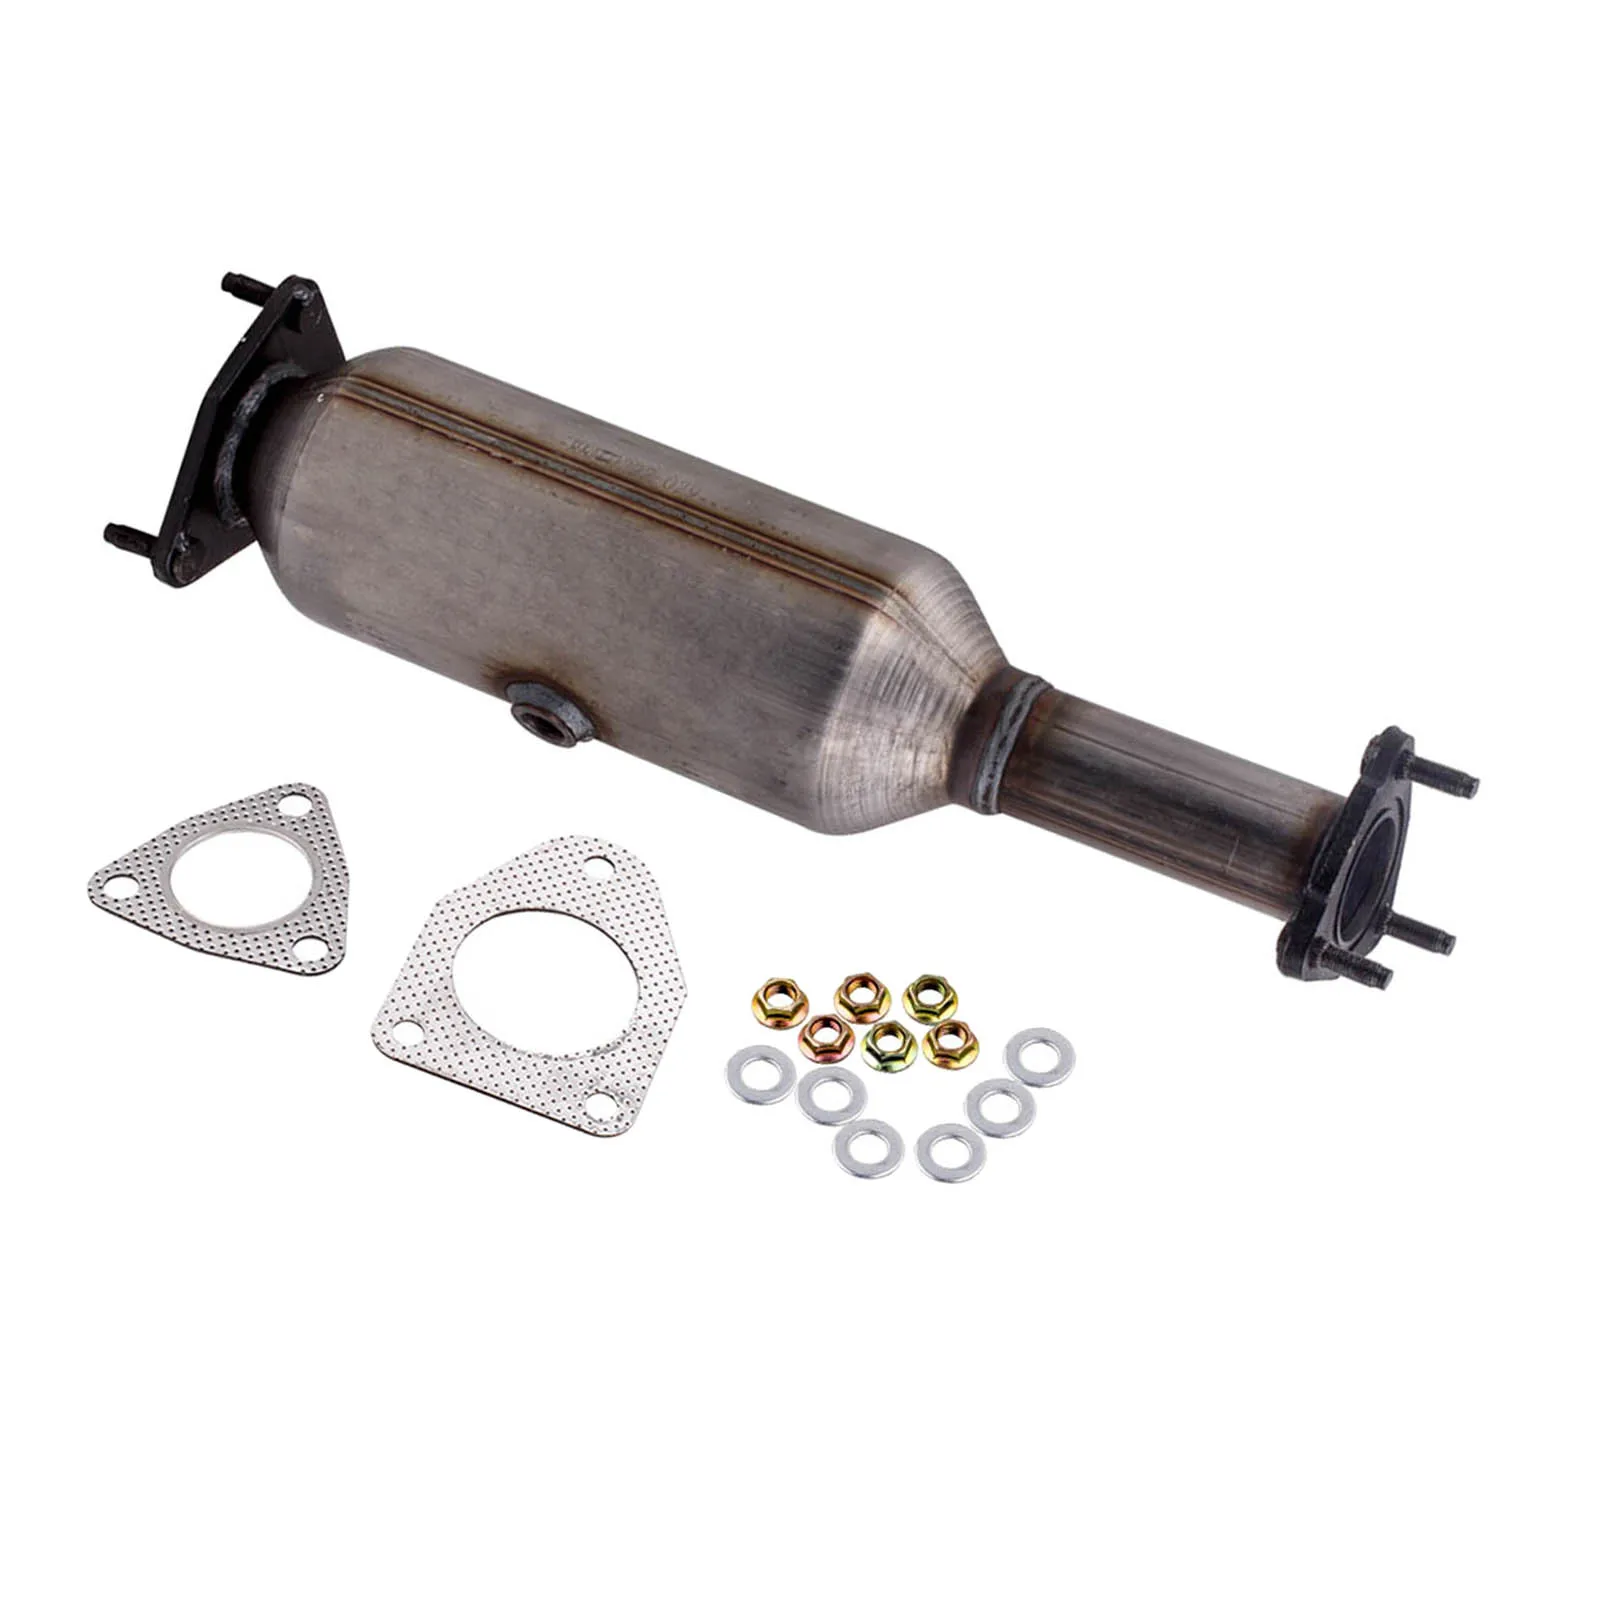 New Catalytic Converter with Gaskets Compatible with Honda Accord 2.4L Engine 2003-2007 2003 2004 2005 2006 2007